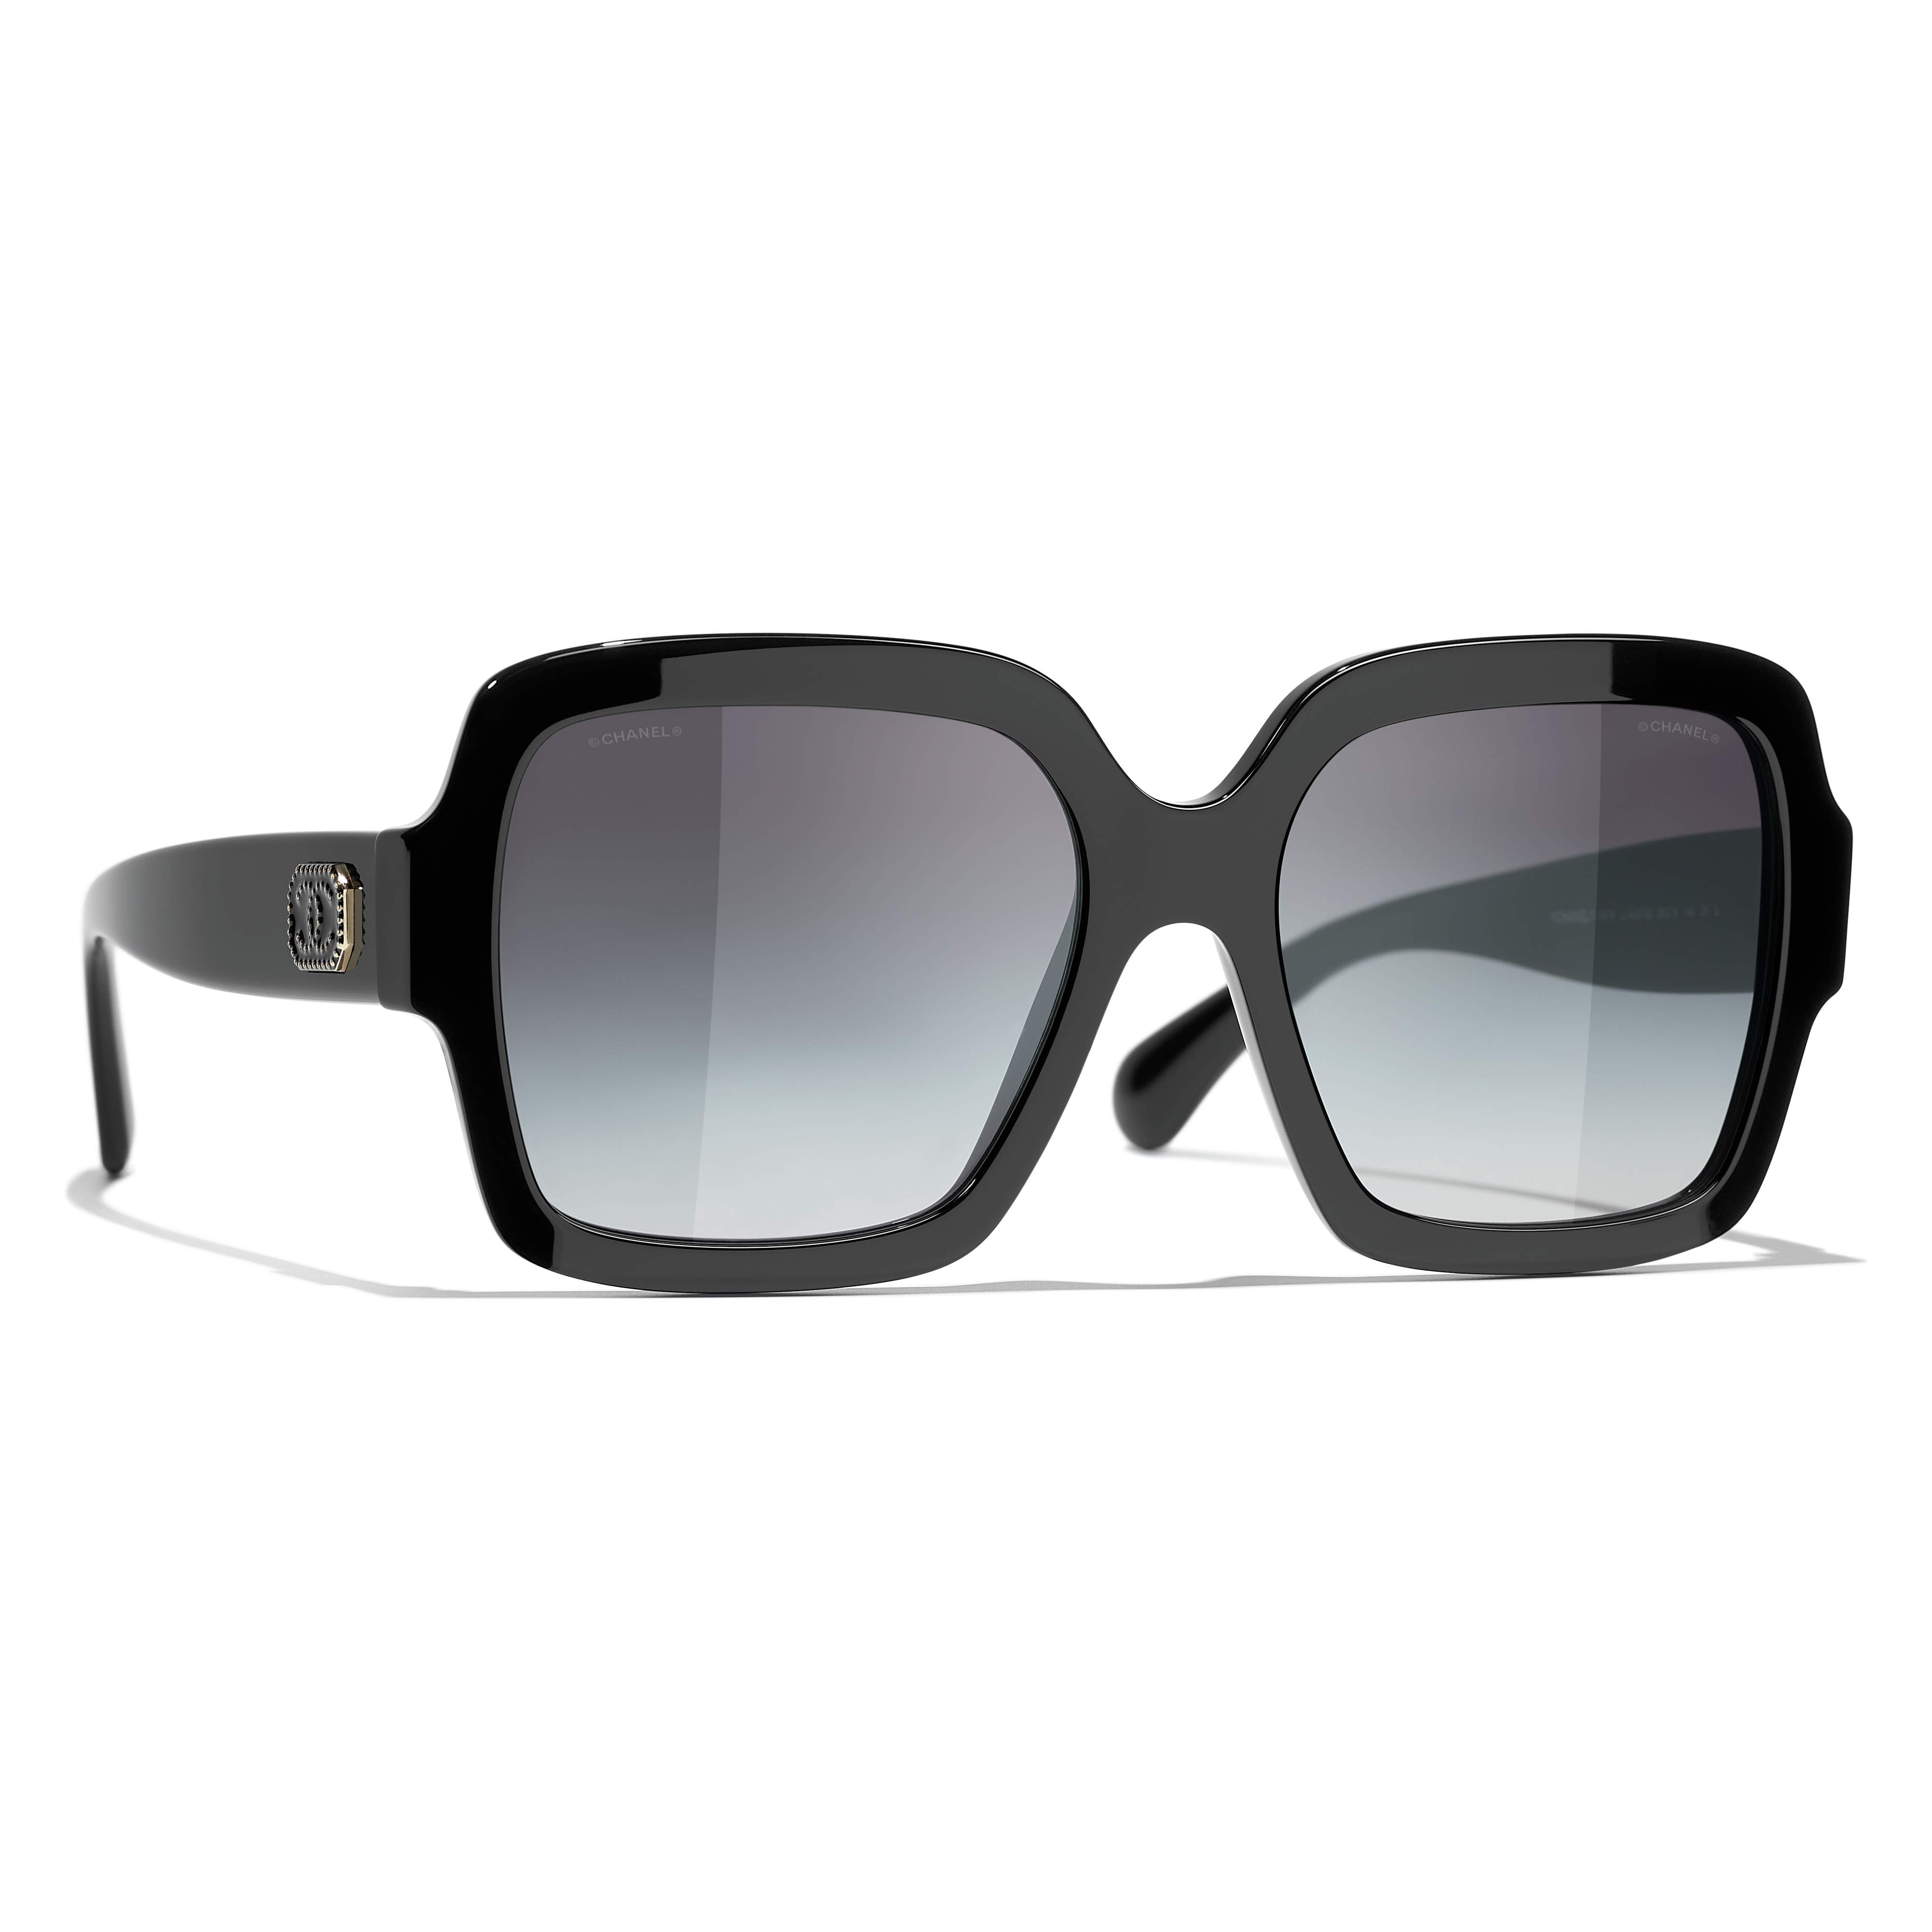 Sunglasses CHANEL Coco charms CH5479 1403/S6 56-18 Black in stock, Price  CHF 253.00